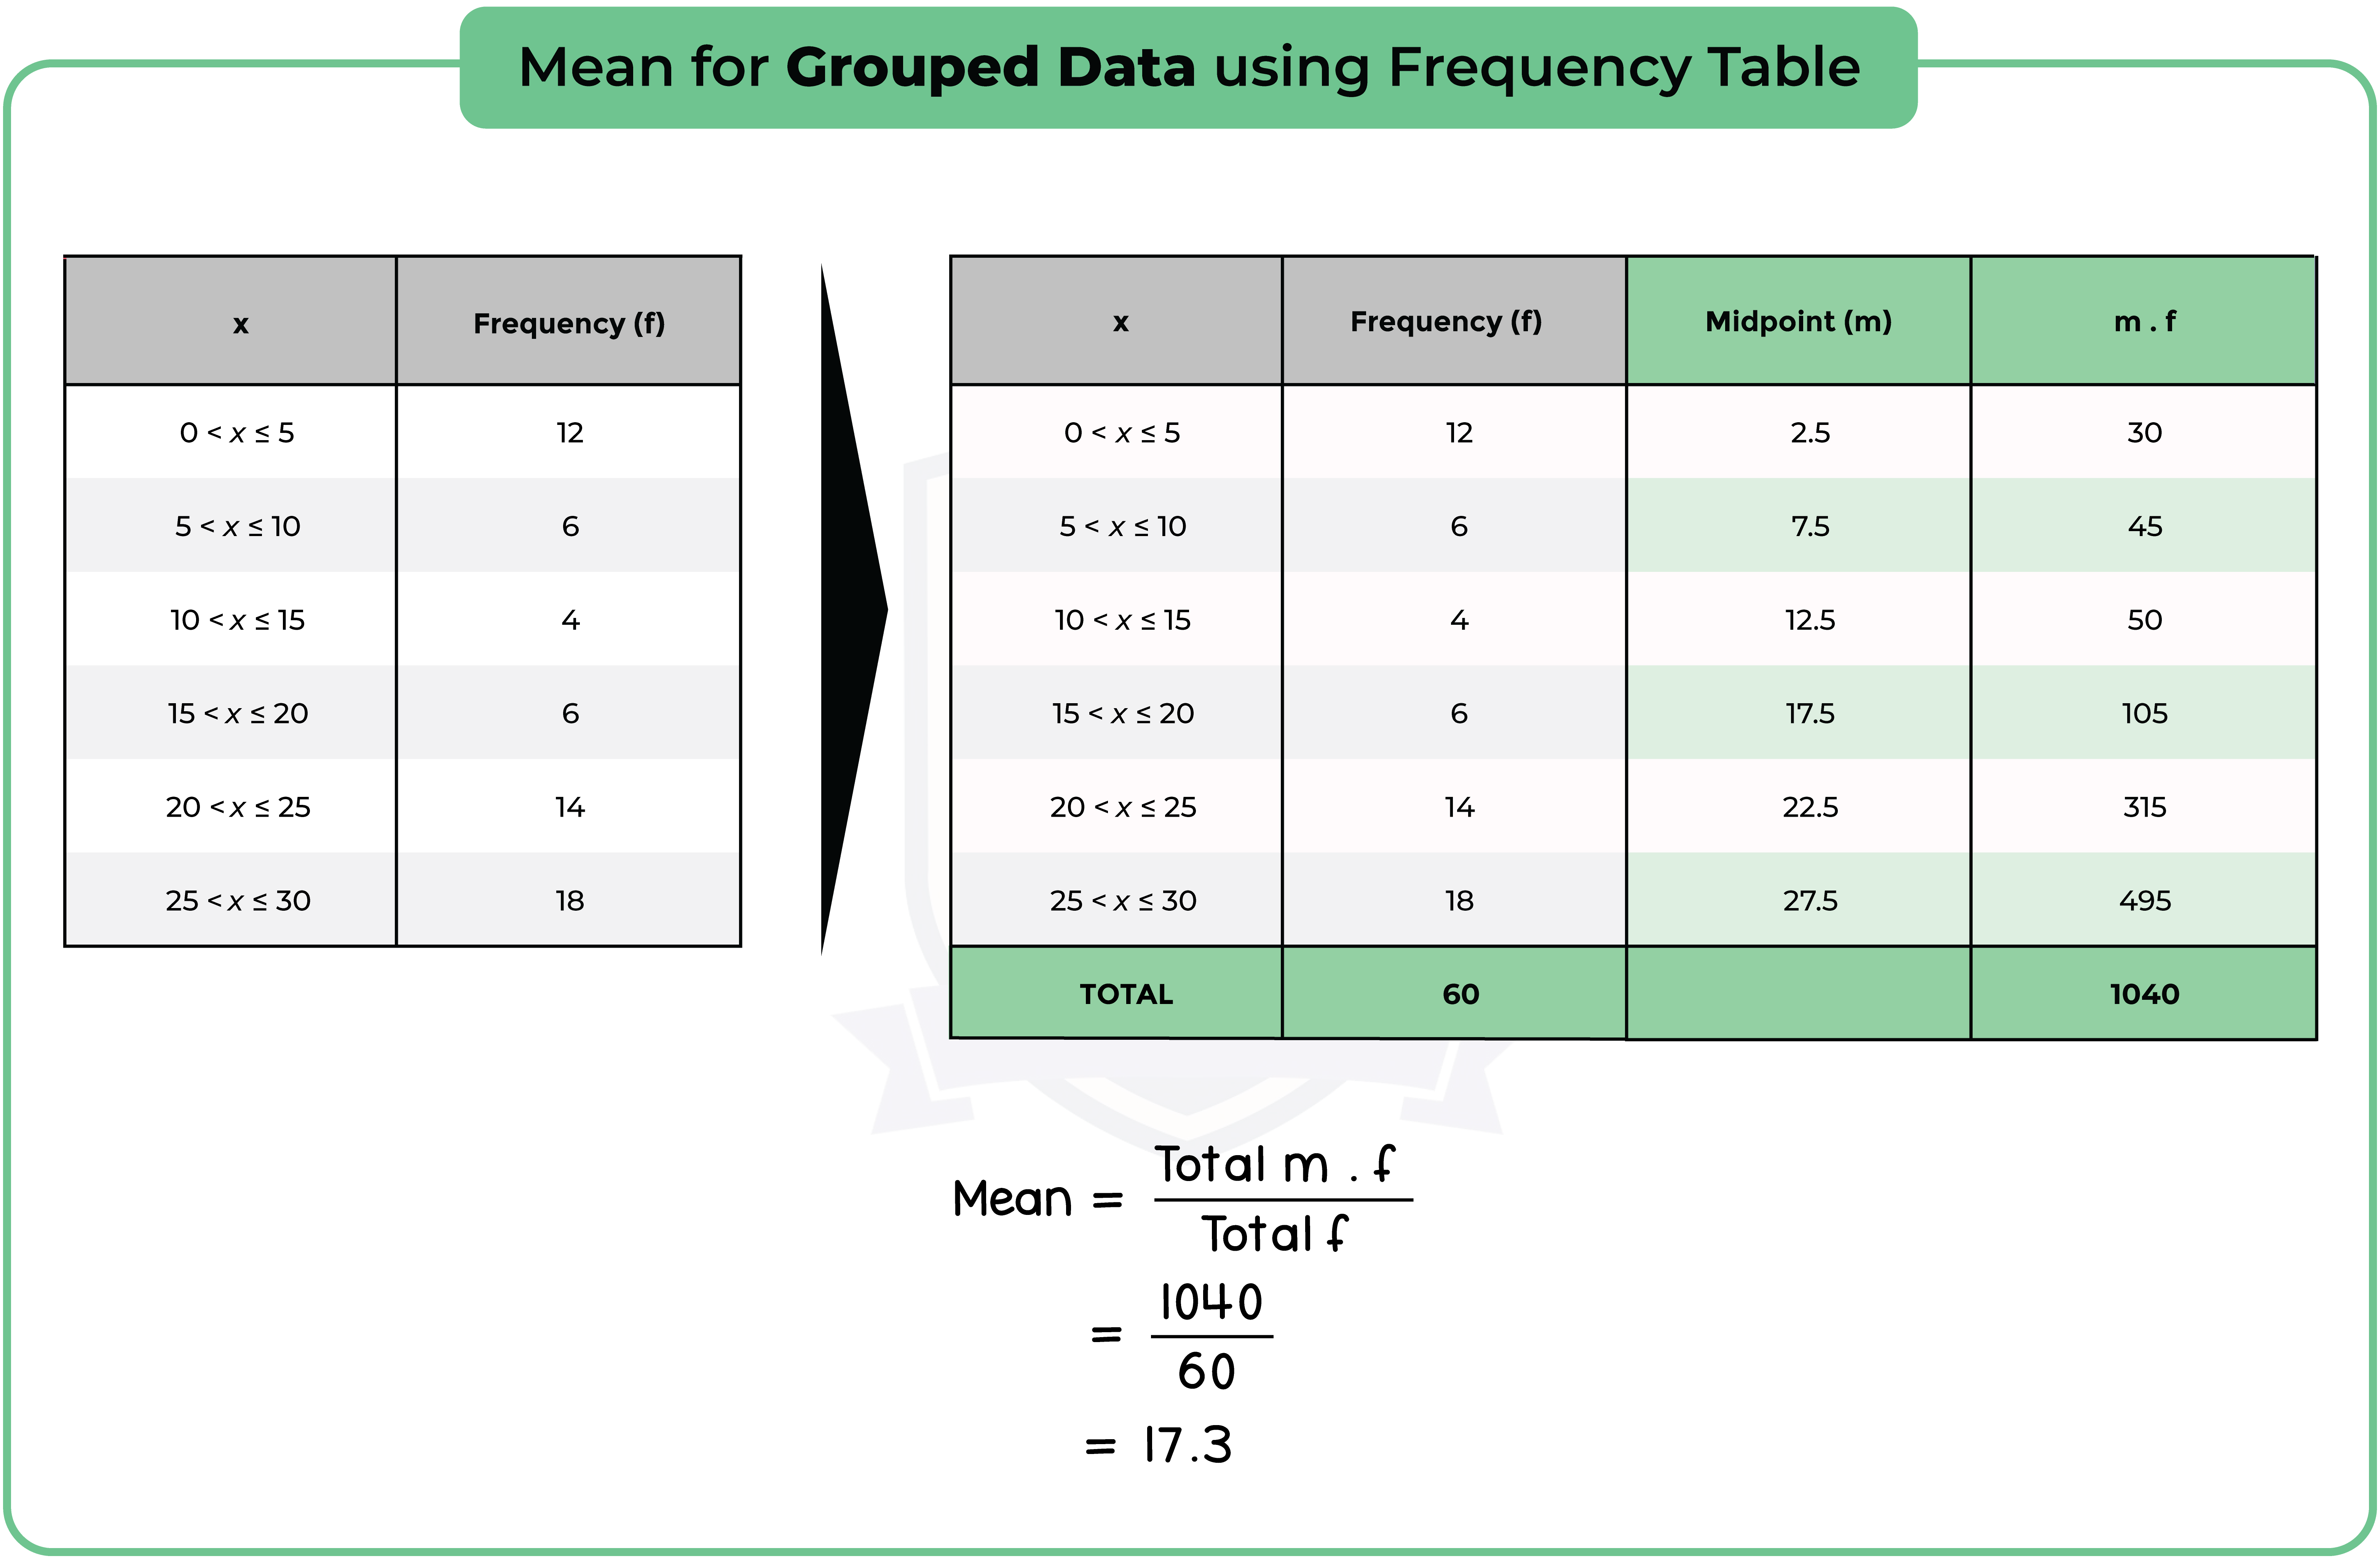 edexcel_igcse_mathematics a_topic 39_statistical measures_003_Mean for Grouped Data using Frequency Table